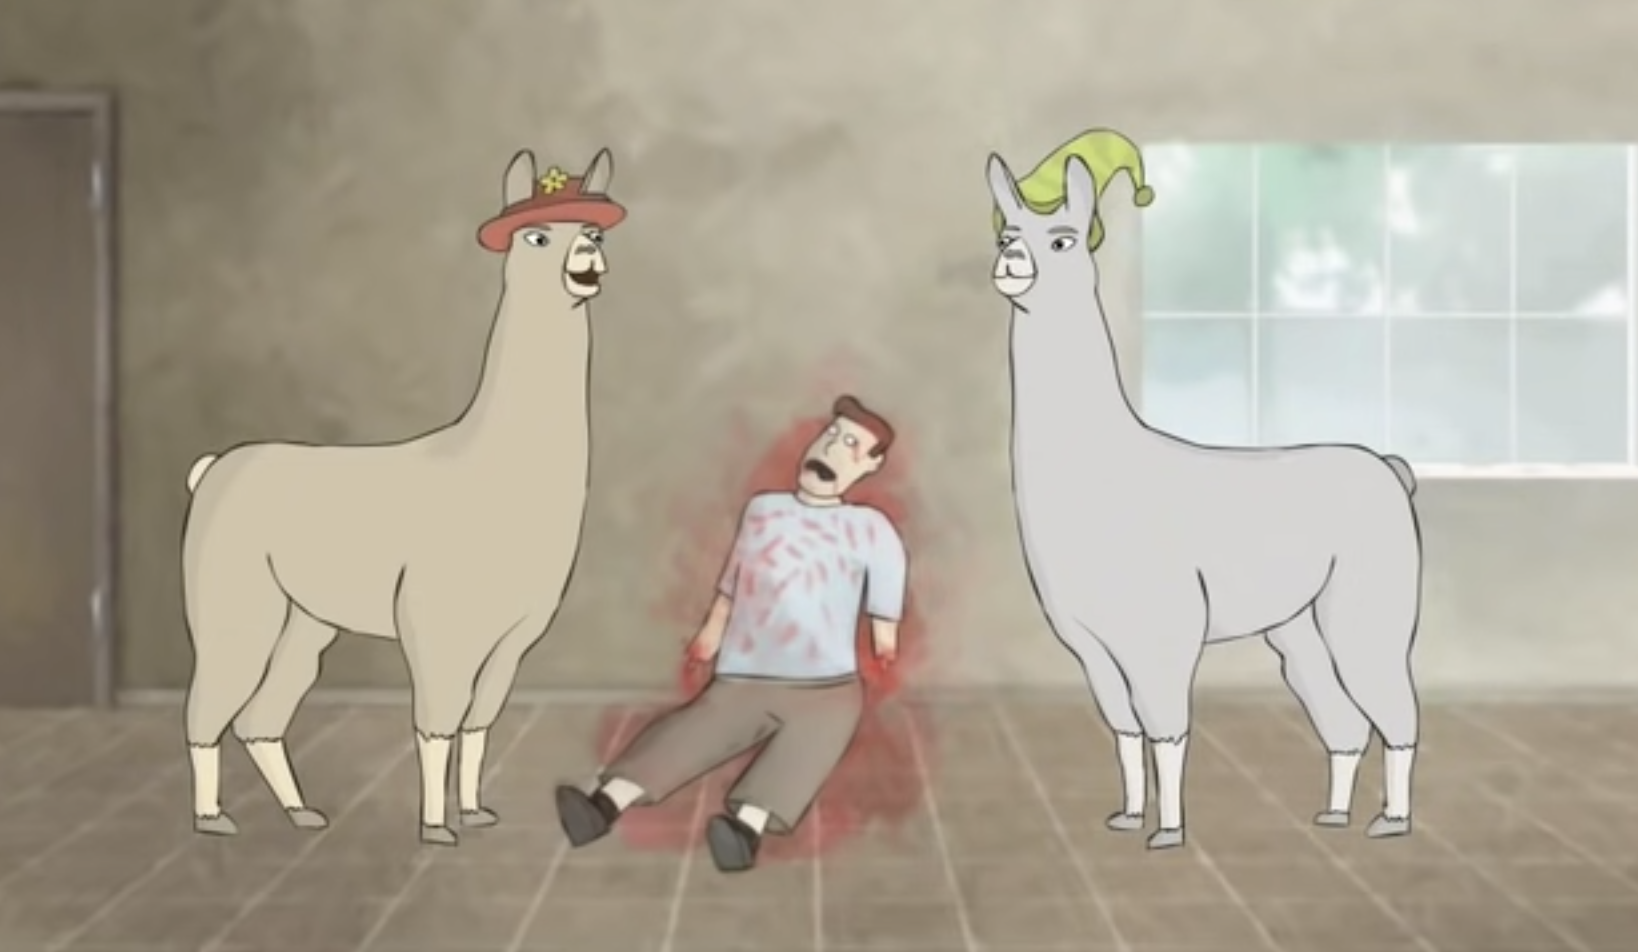 Carl and the other llama with hats on next to the dead guy